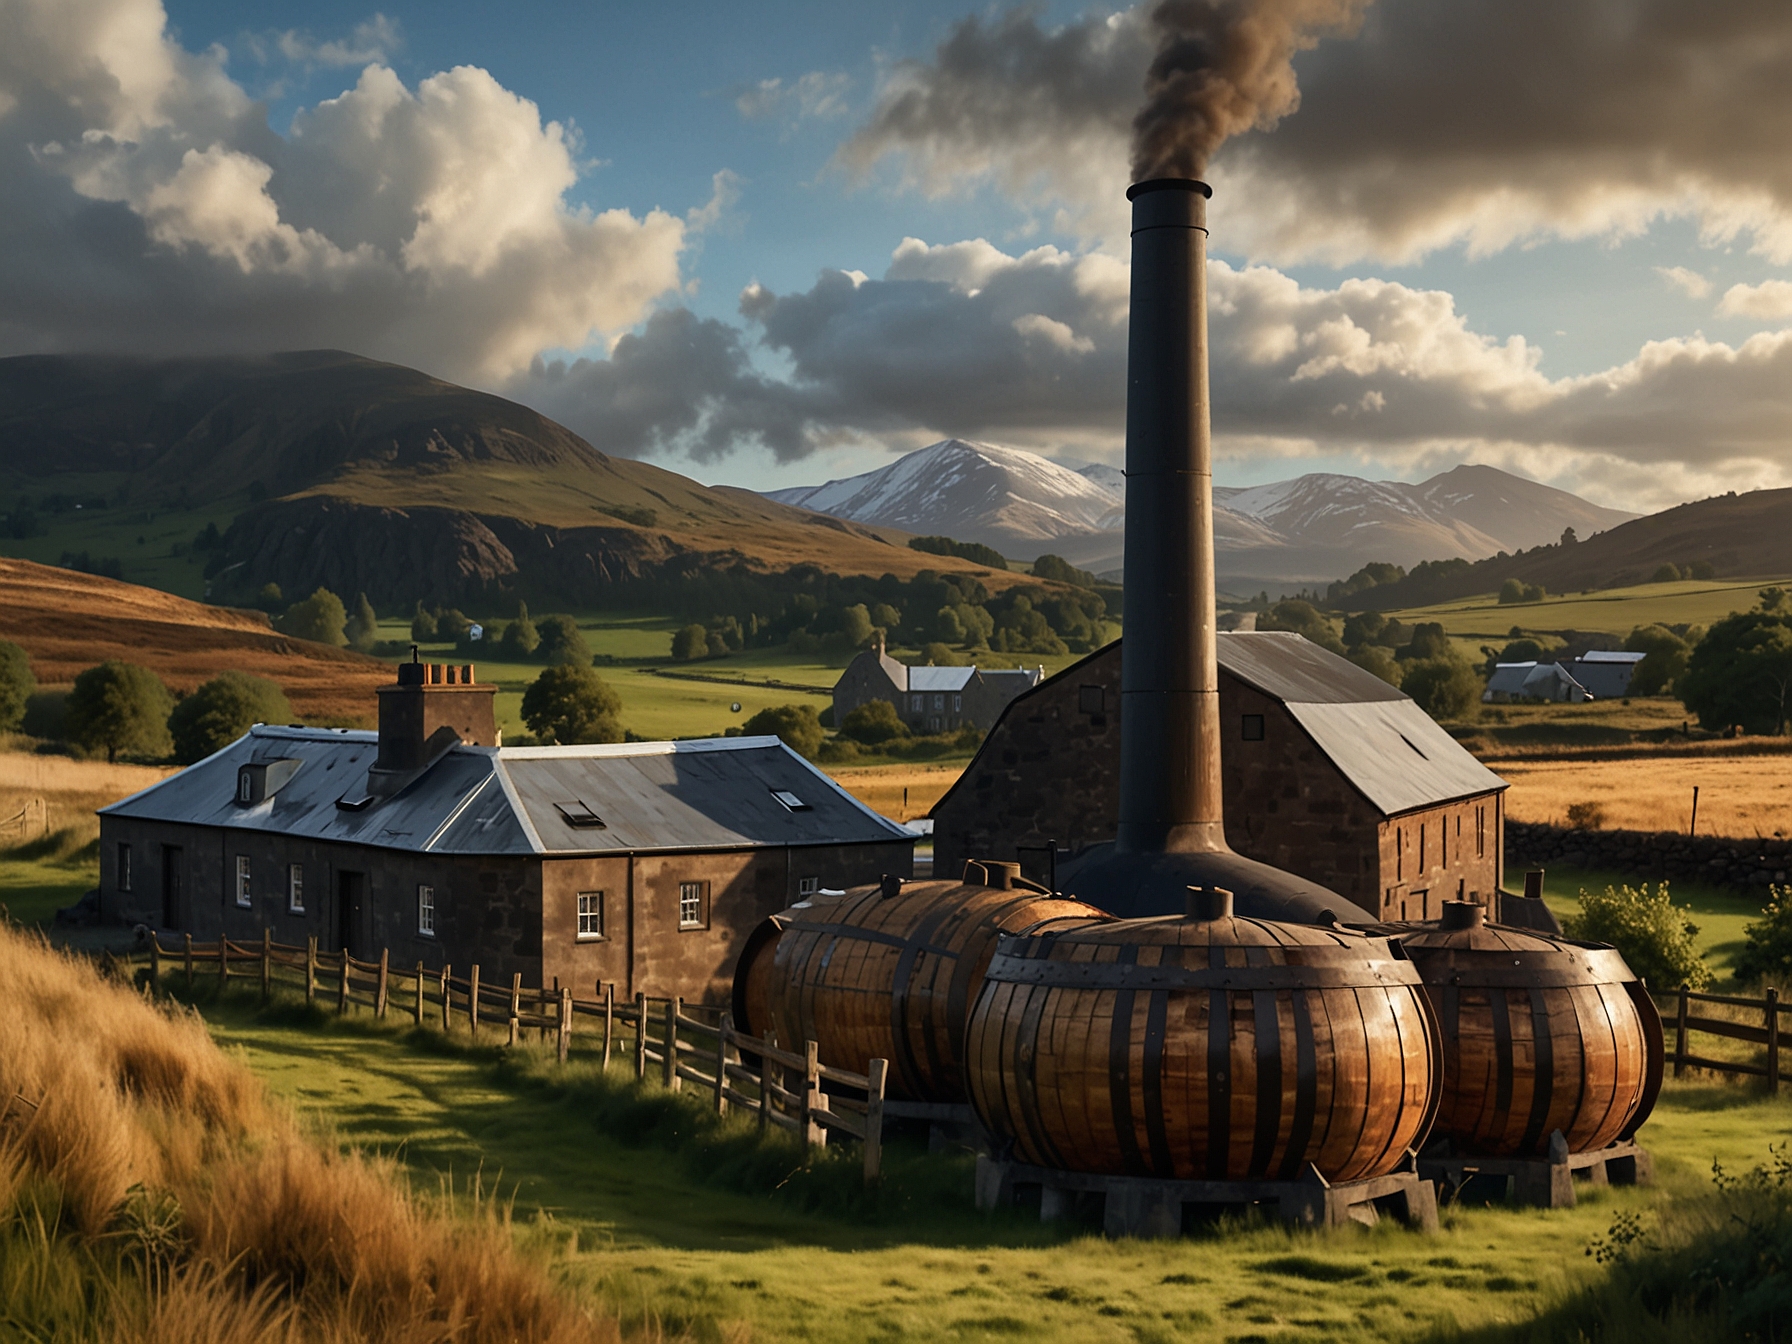 Illustration of a traditional Scottish distillery, surrounded by the picturesque rural landscape, highlighting the deep-rooted connection between Scotch whisky production and Scotland's heritage.